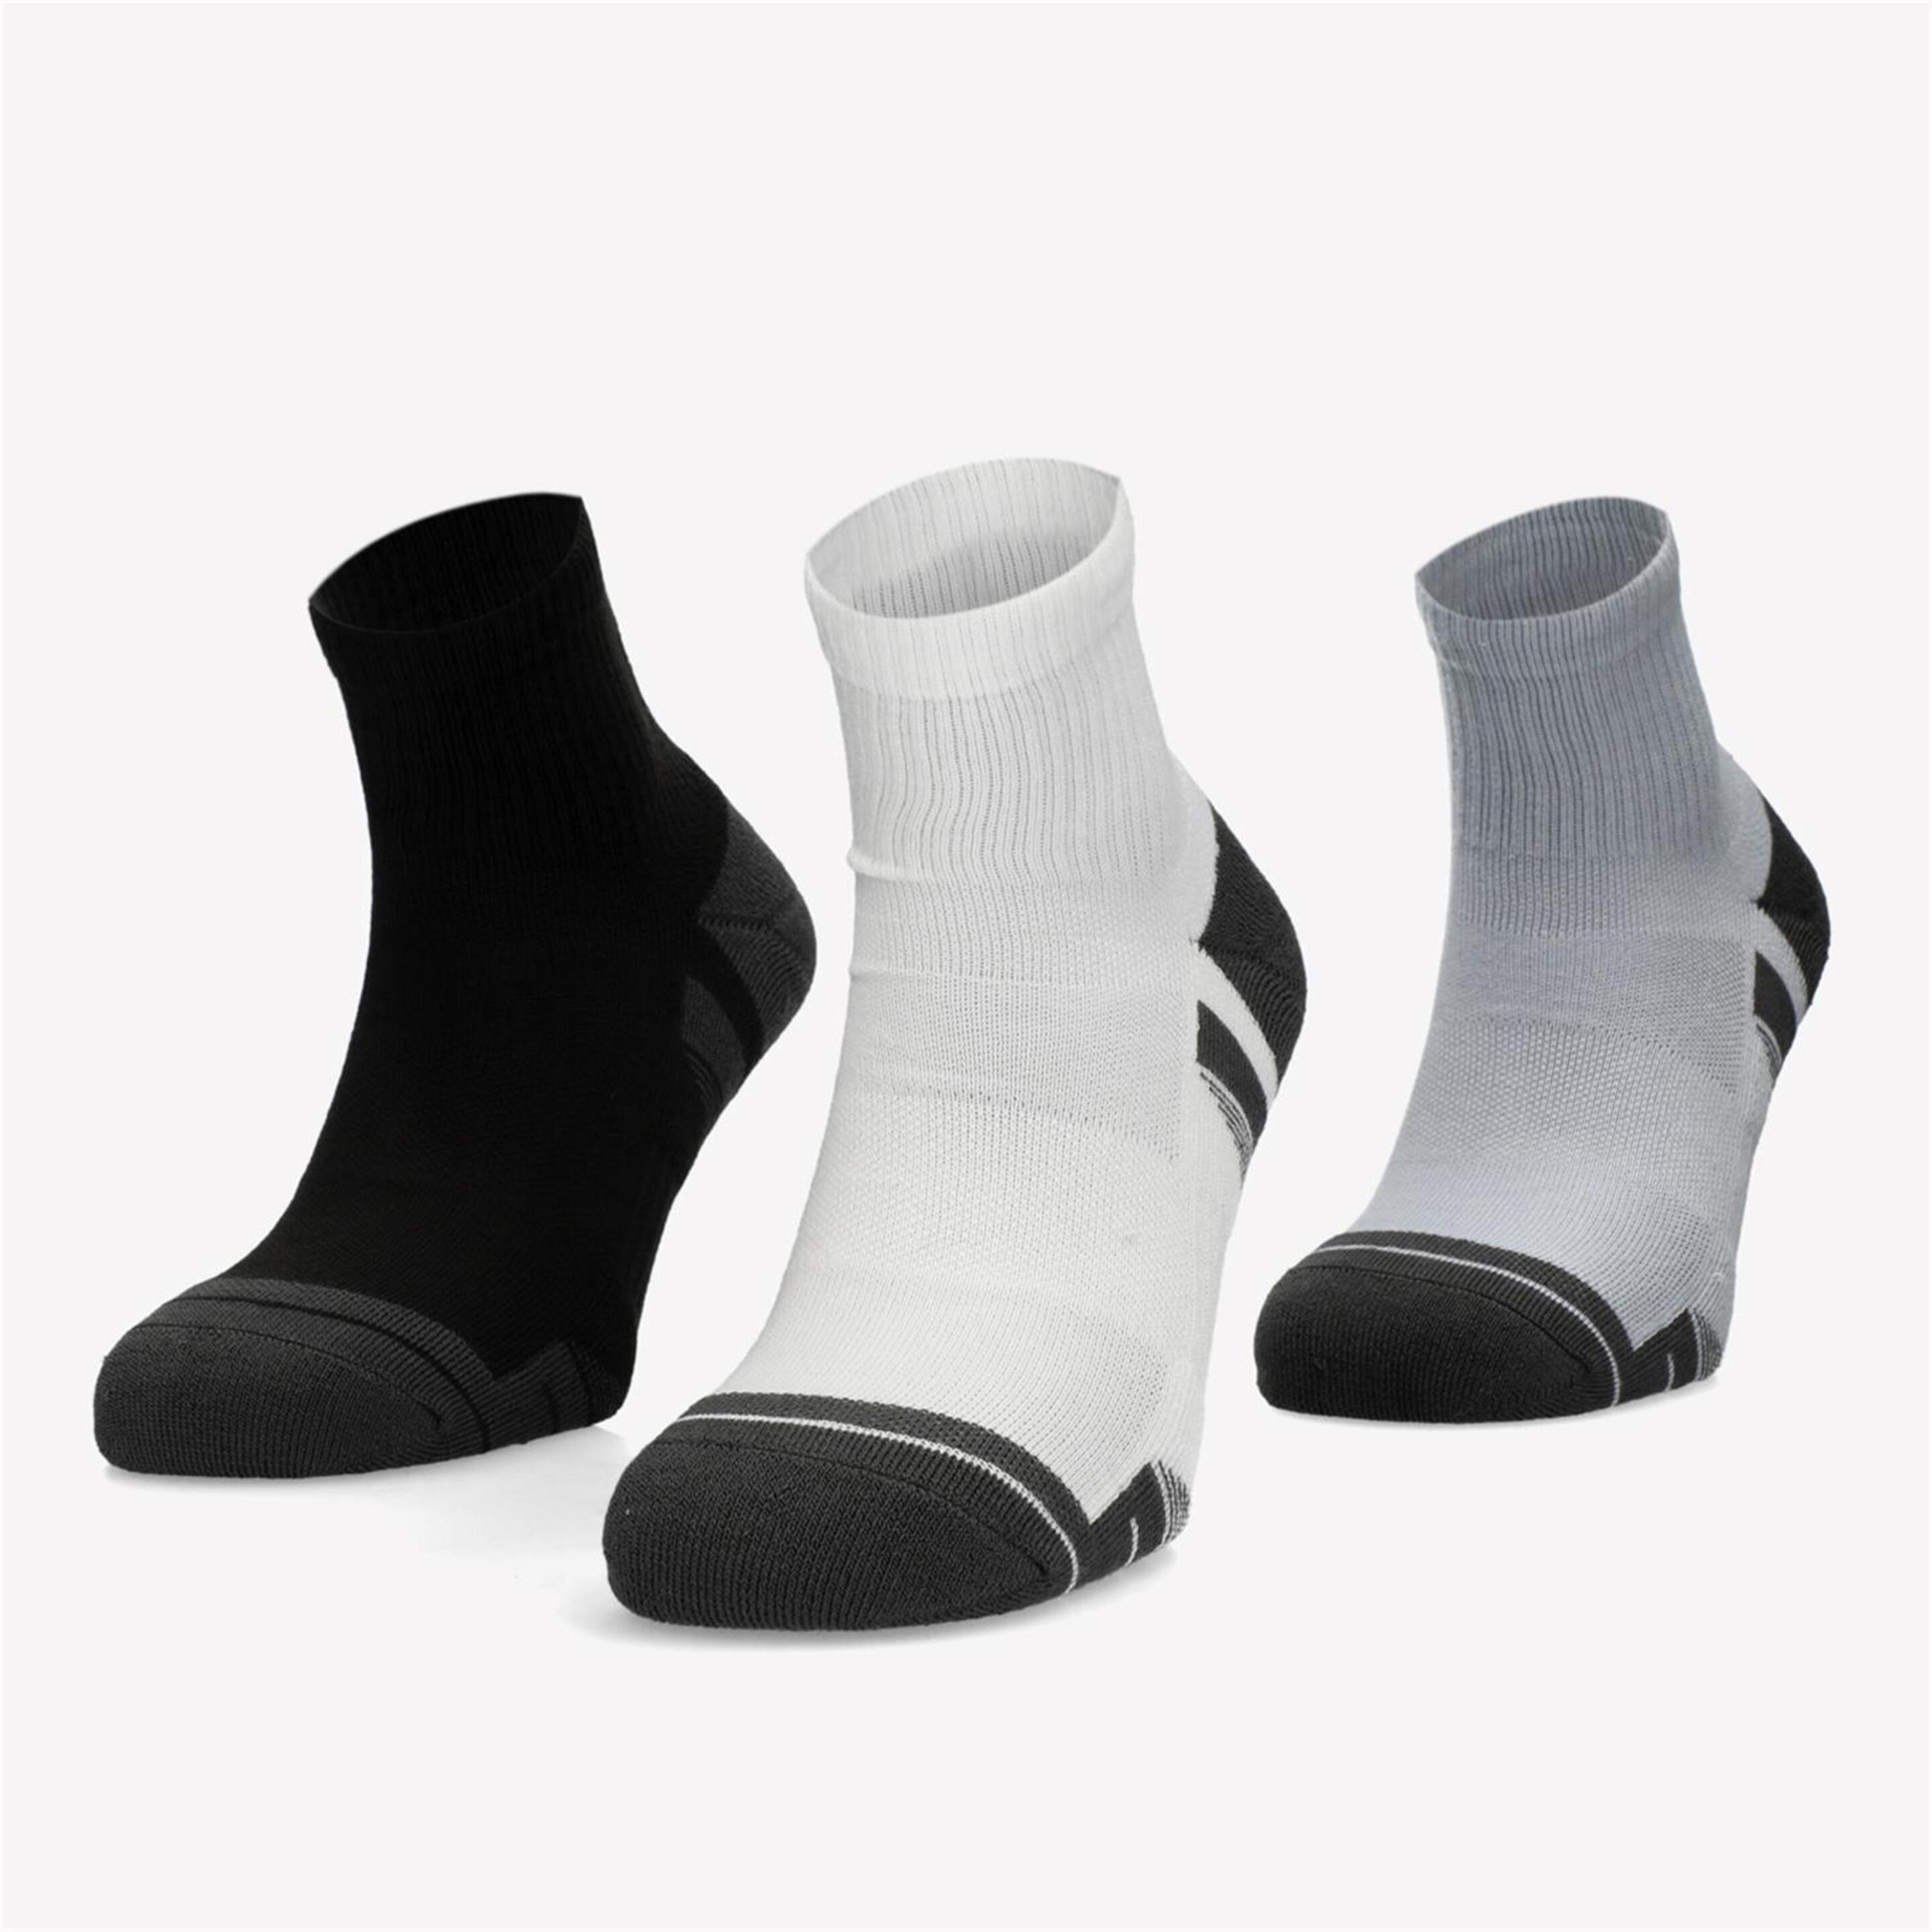 Under Armour Performance Tech - gris - Calcetines